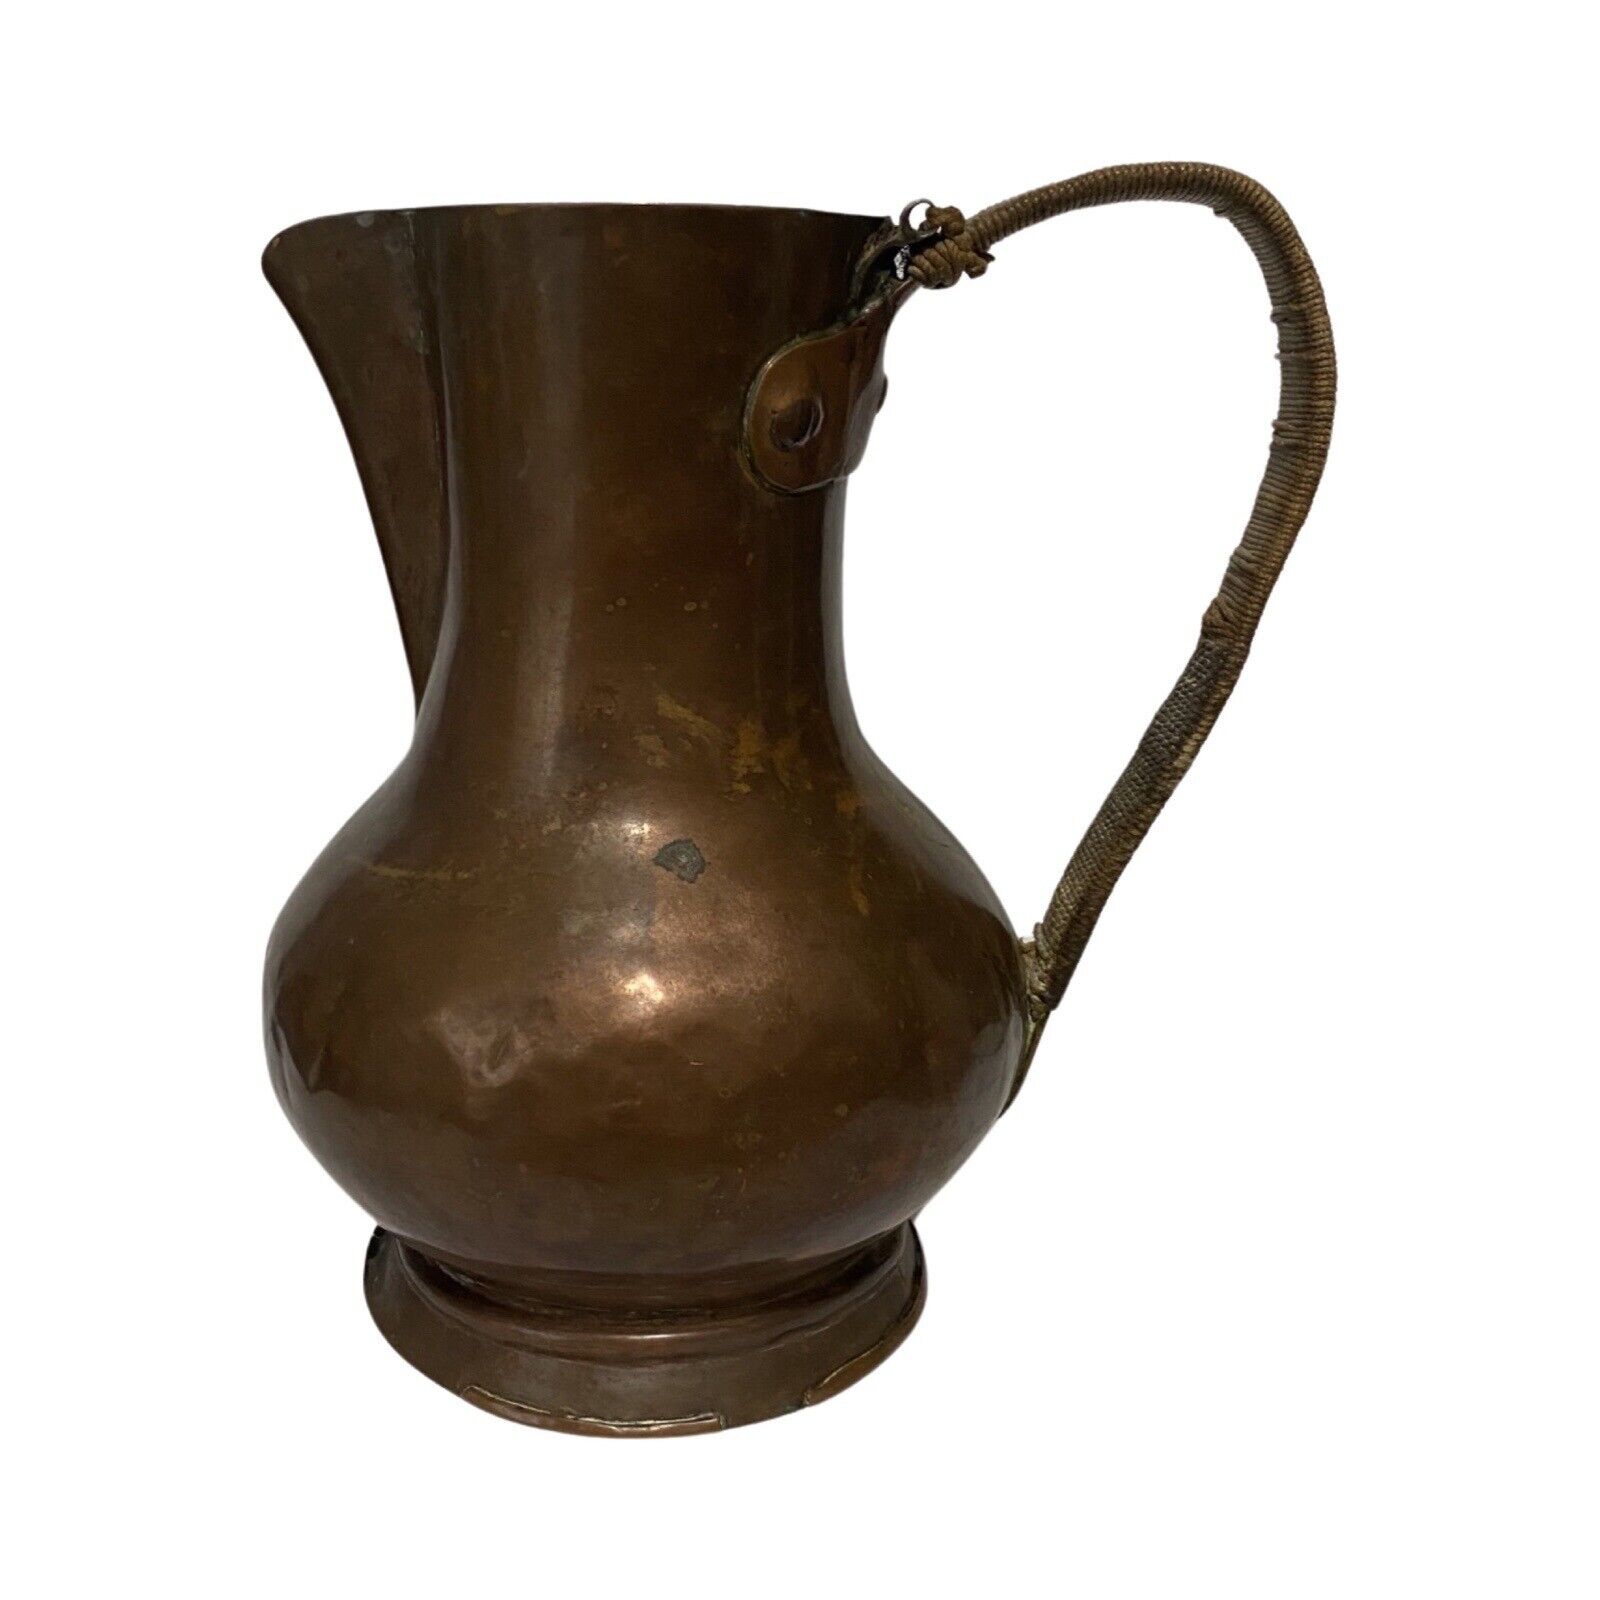 Rustic Antique Copper Pitcher with Twine-Wrapped Handle, Primitive 8.5” Tall